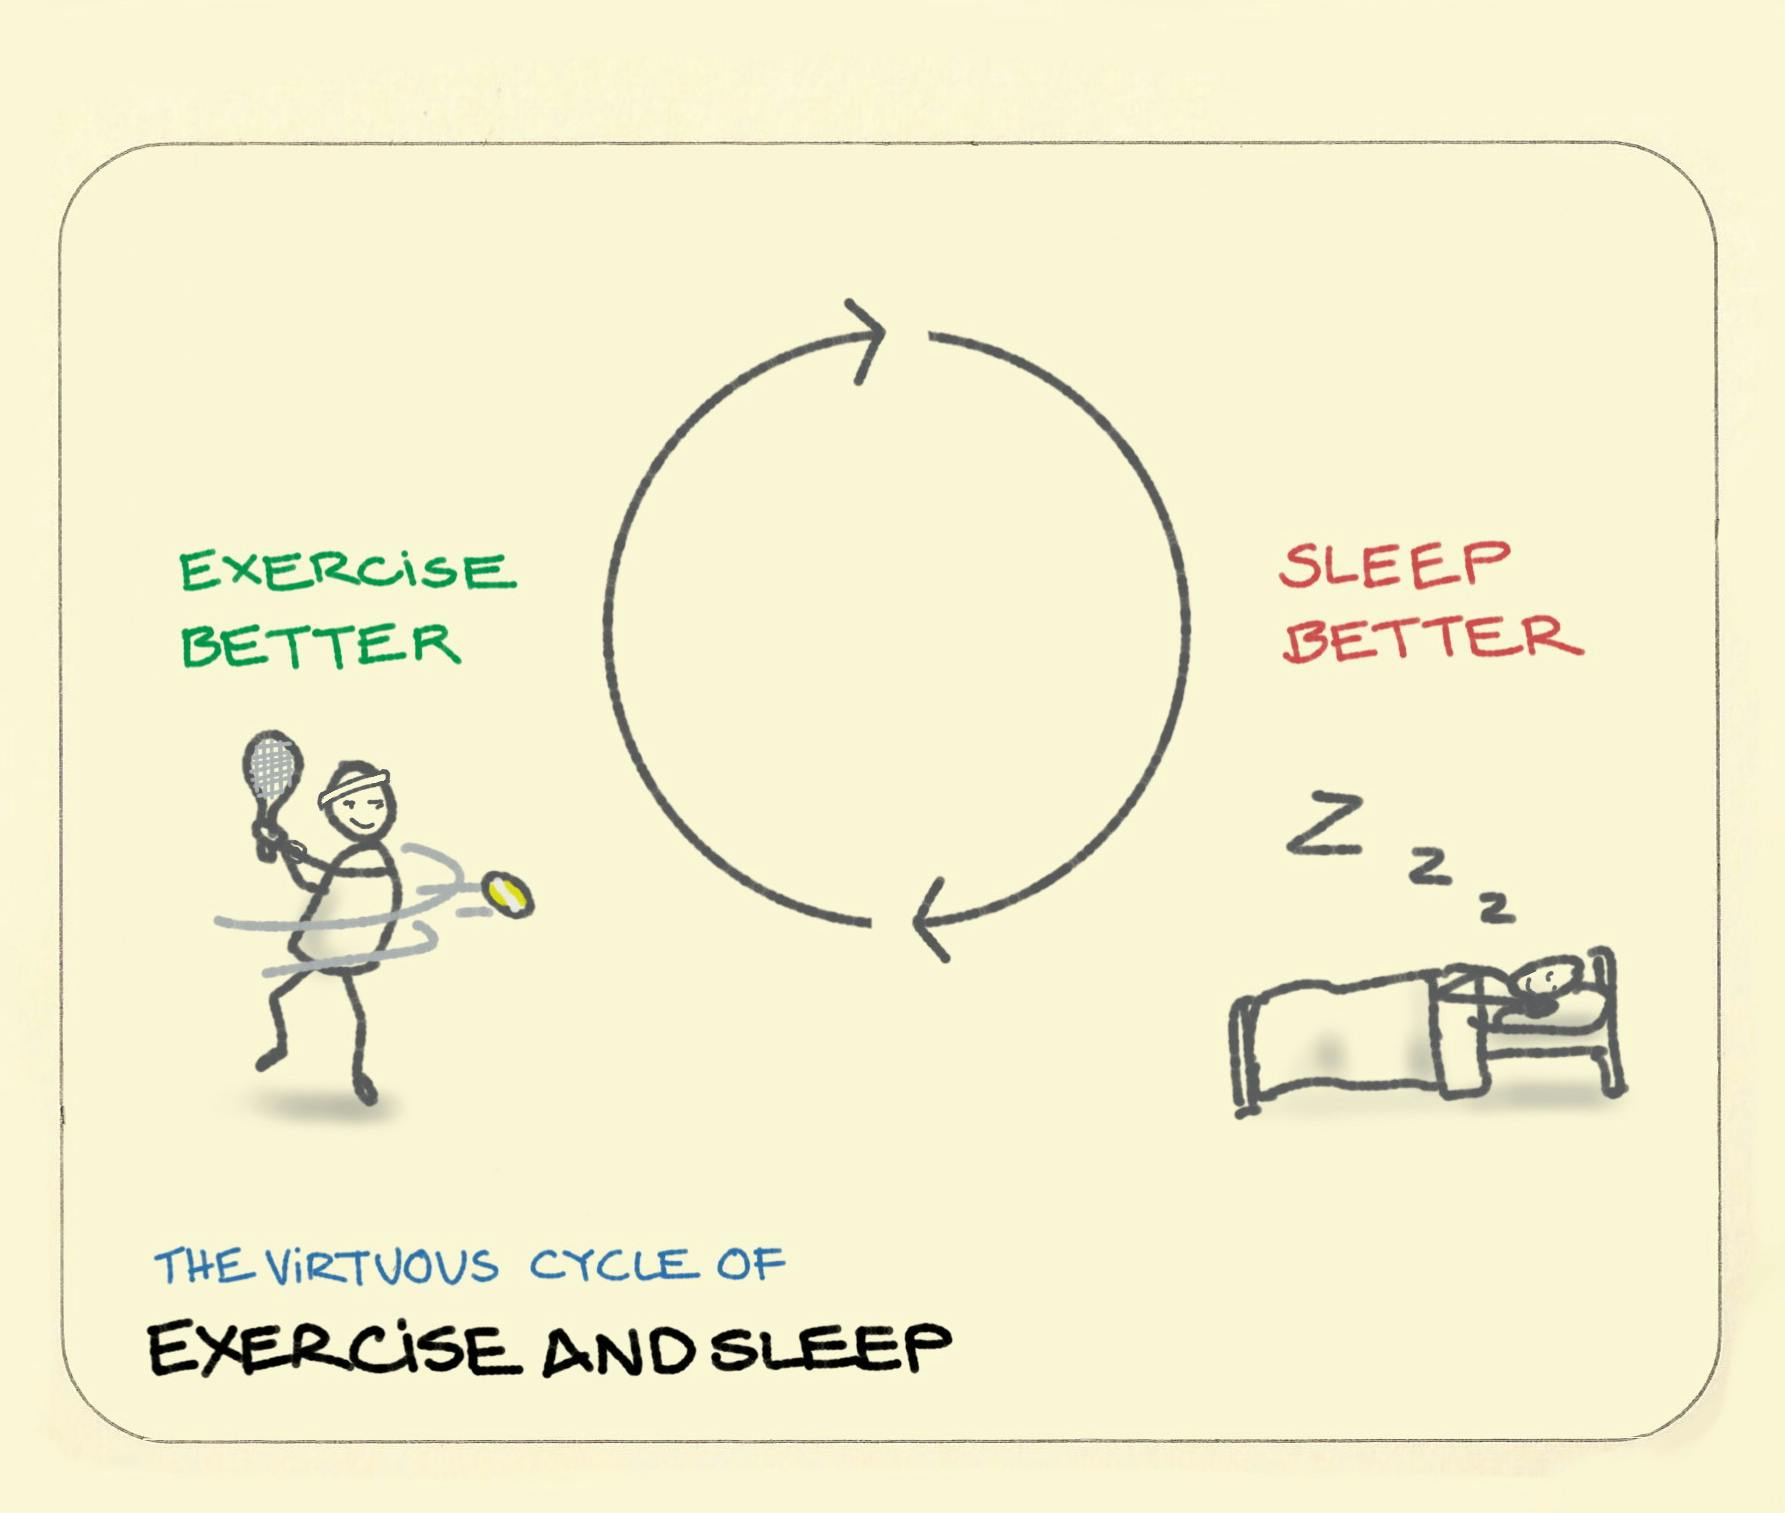 The virtuous cycle of exercise and sleep showing the loop of a tennis player exercising better, then sleeping better, then exercising better...